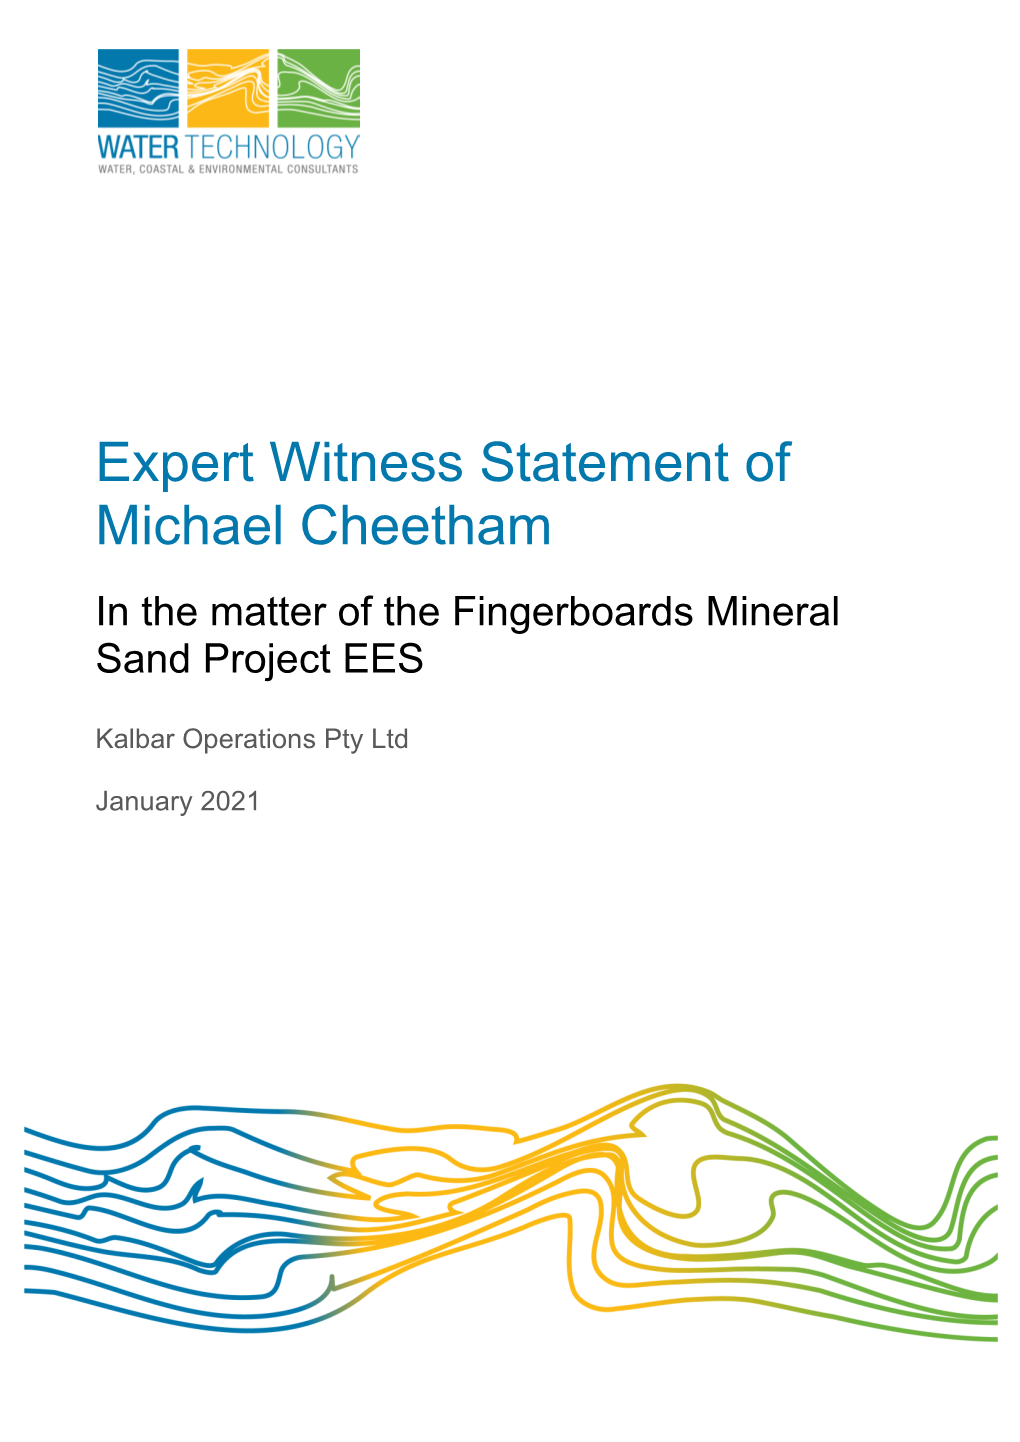 Expert Witness Statement of Michael Cheetham in the Matter of the Fingerboards Mineral Sand Project EES